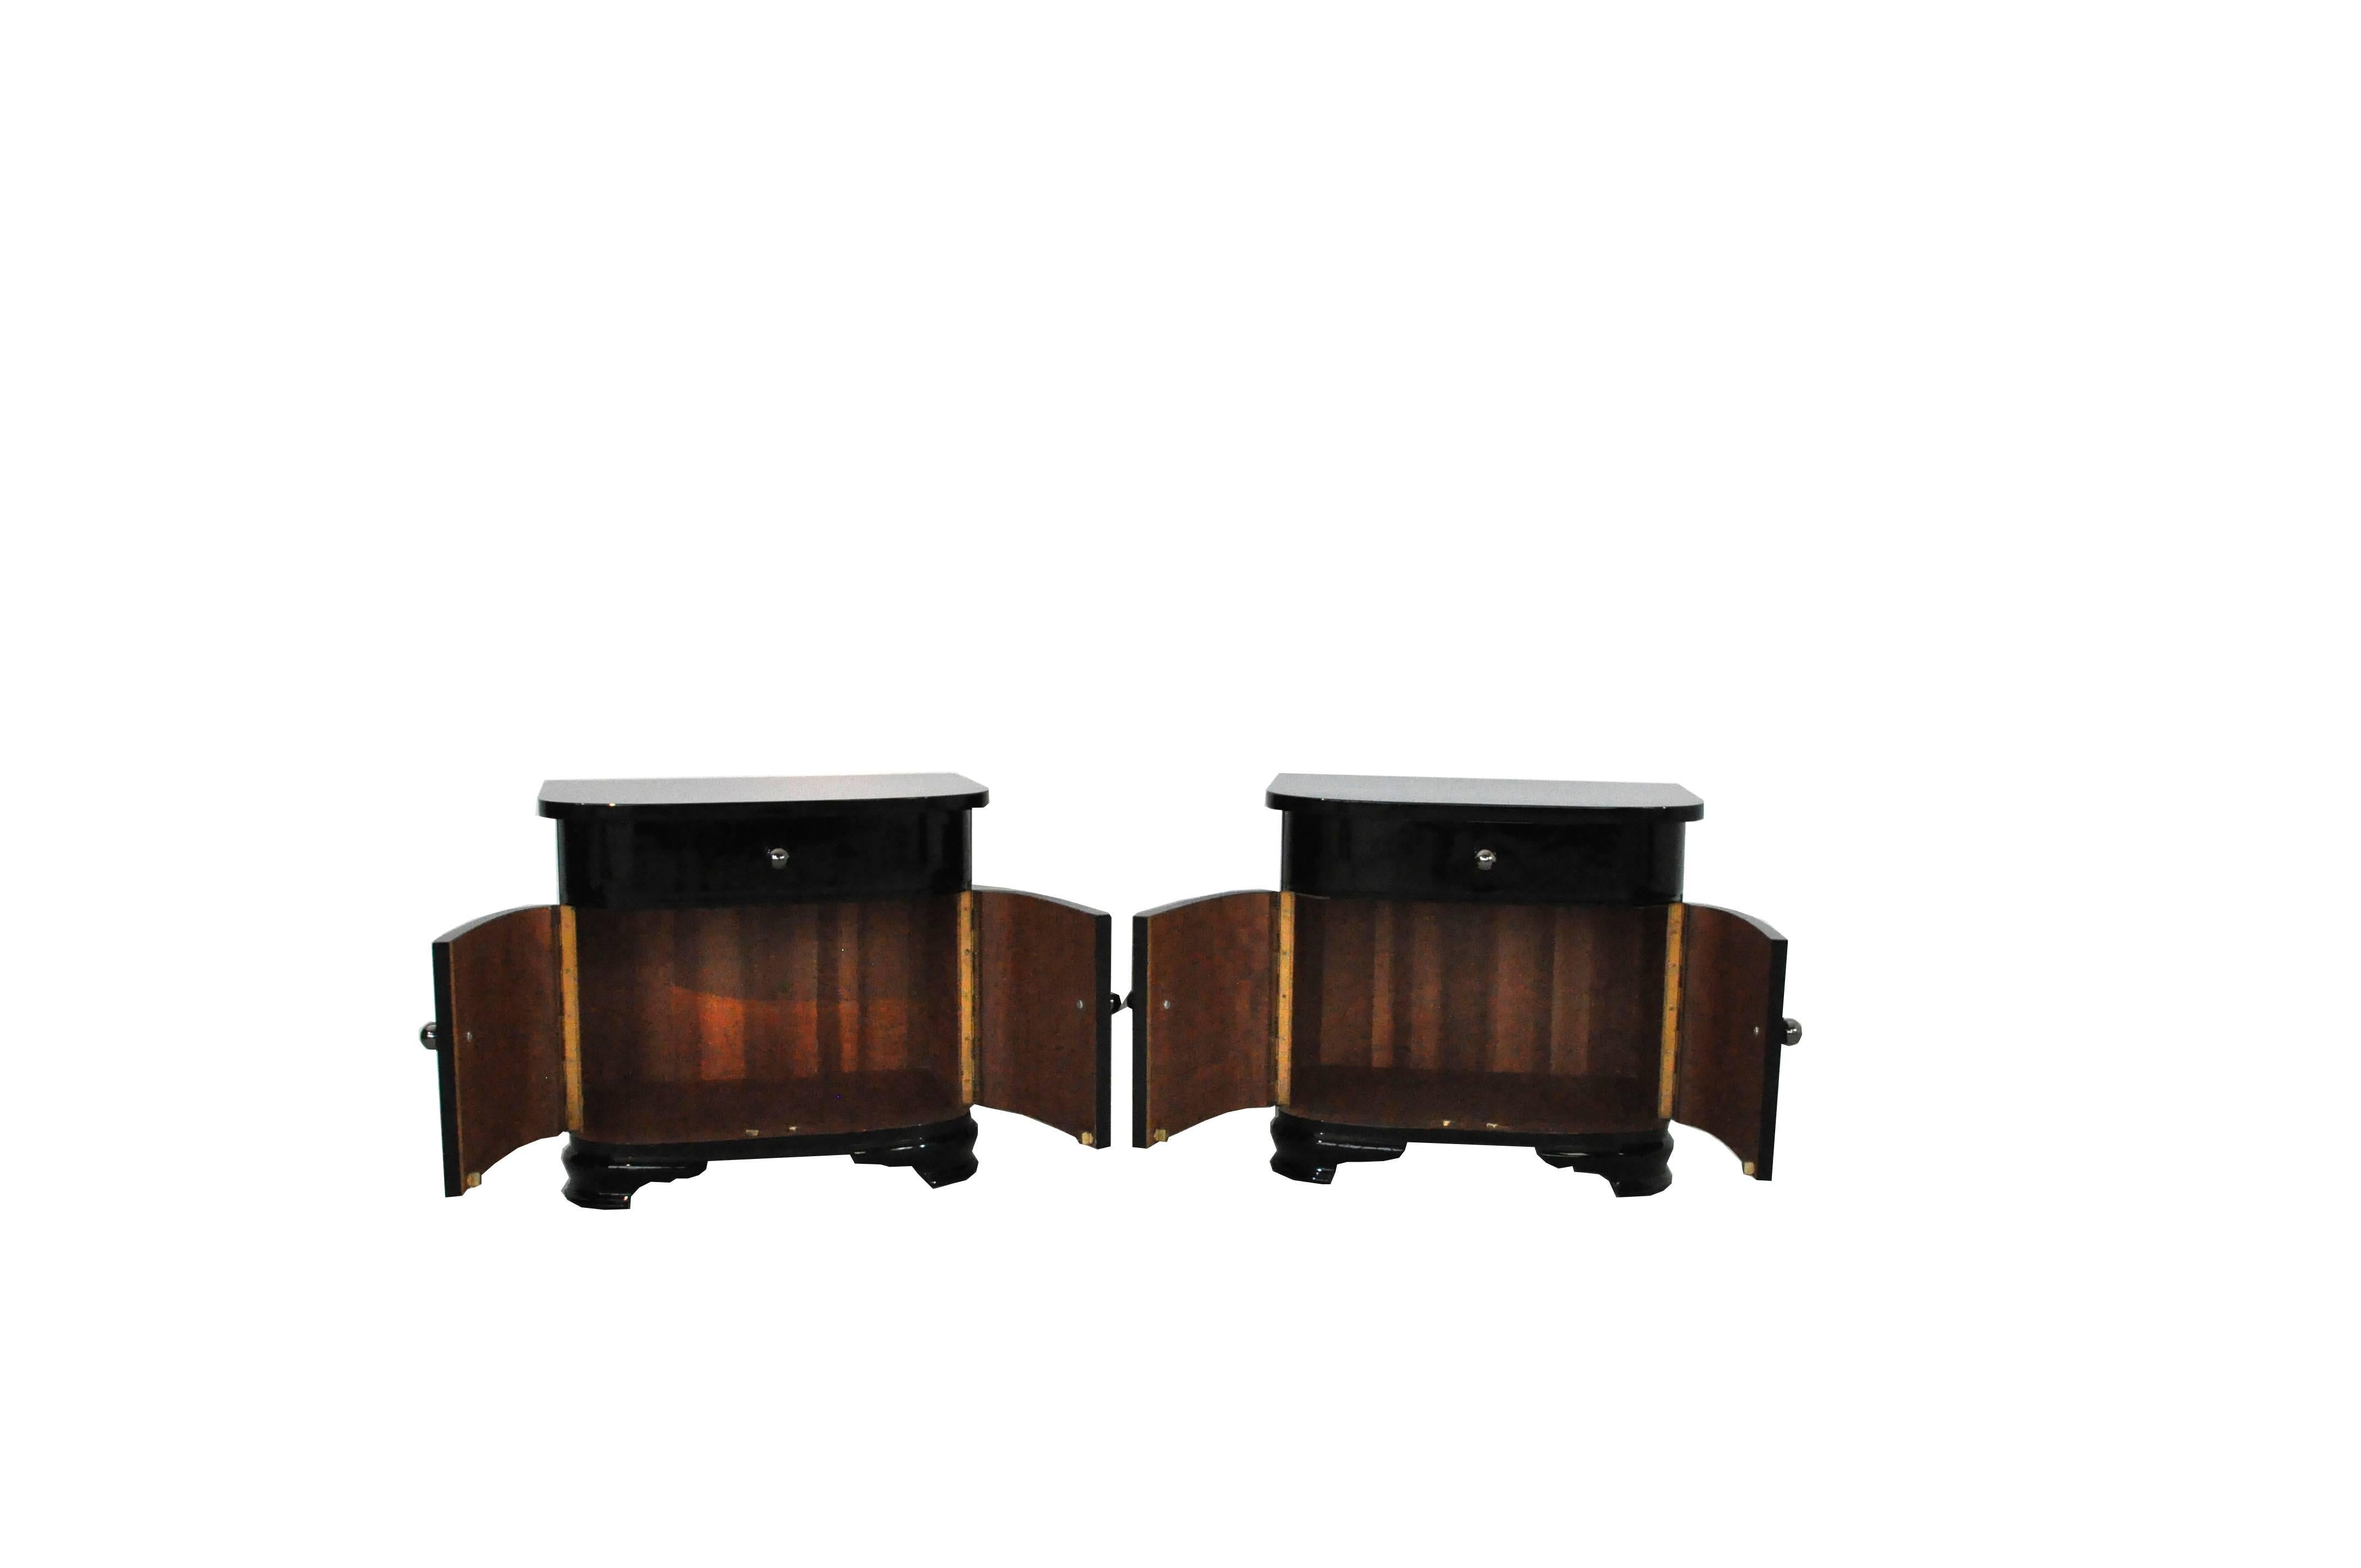 We picked up this wonderful pair of nightstands at a private household in Paris at the beginning of 2016. They were completely restored with a high gloss black paintjob made of high quality piano lacquer. A unique set for exclusive bedrooms.

Art